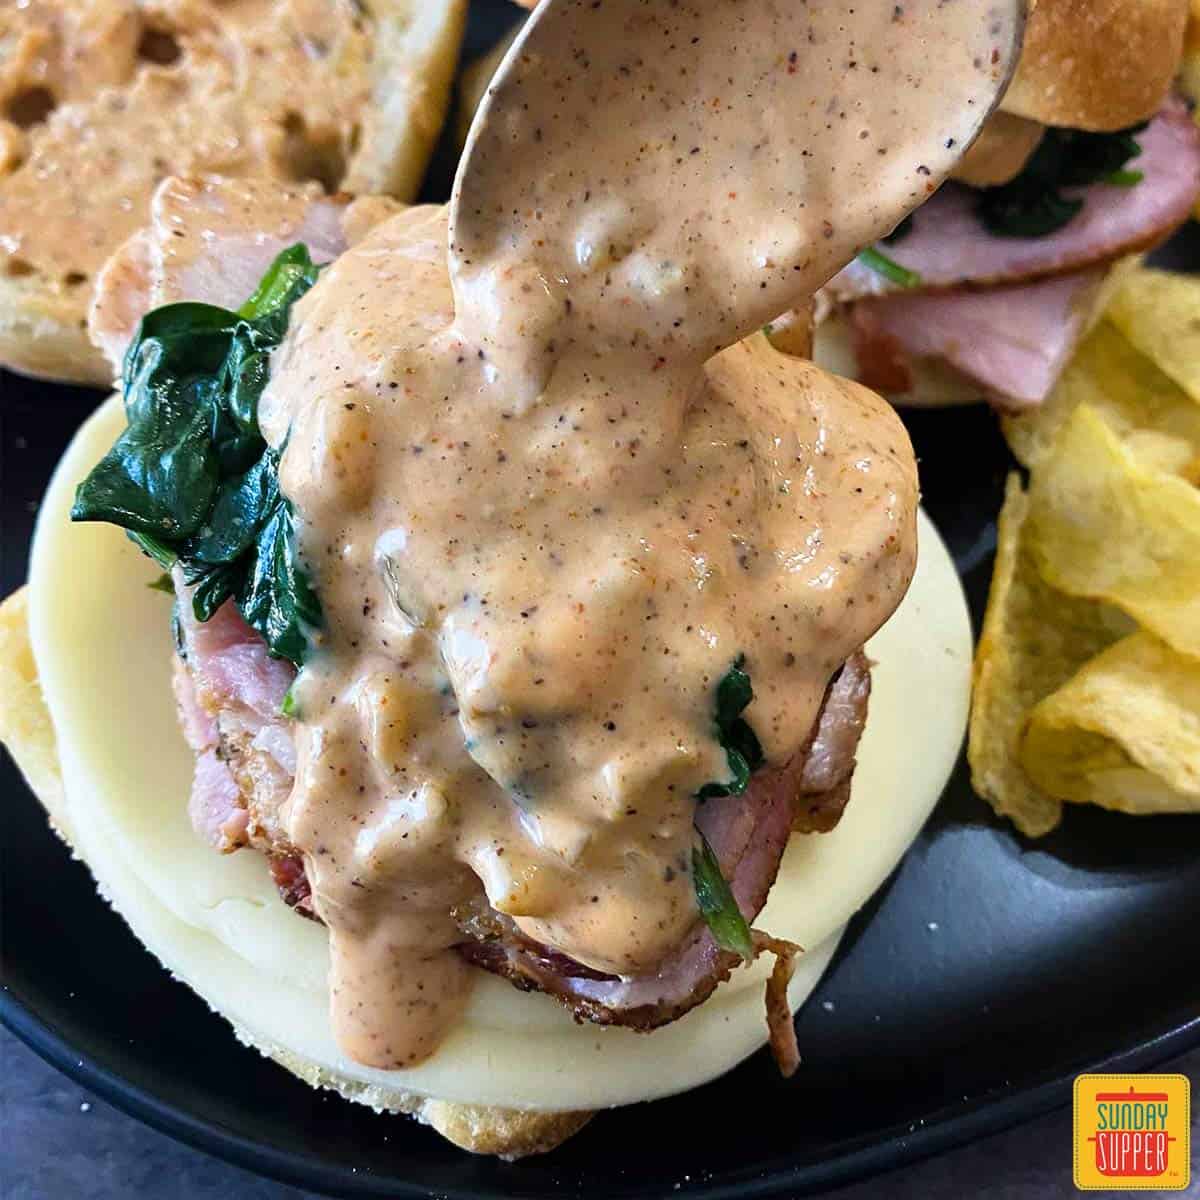 topping a pork sandwich with remoulade sauce on a spoon